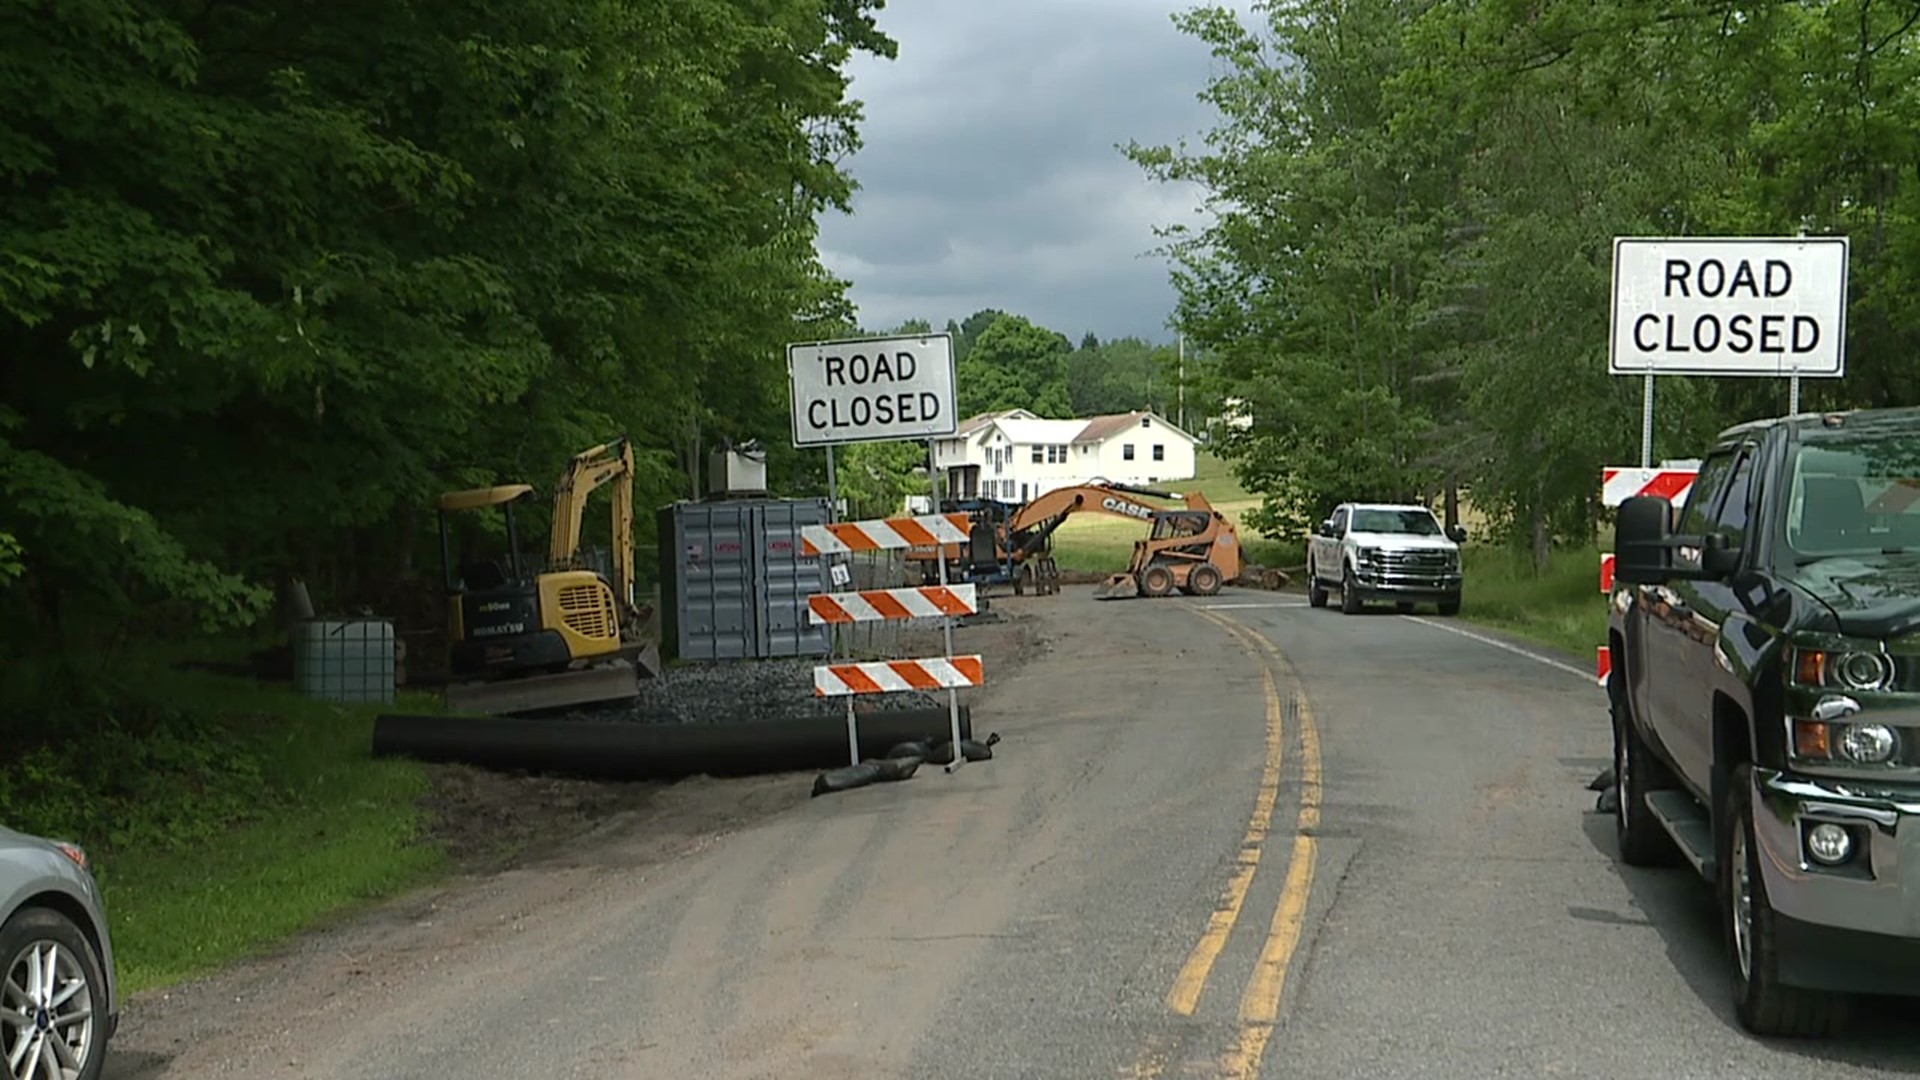 PennDOT says Route 292 near Falls is closed for an emergency pipe replacement.